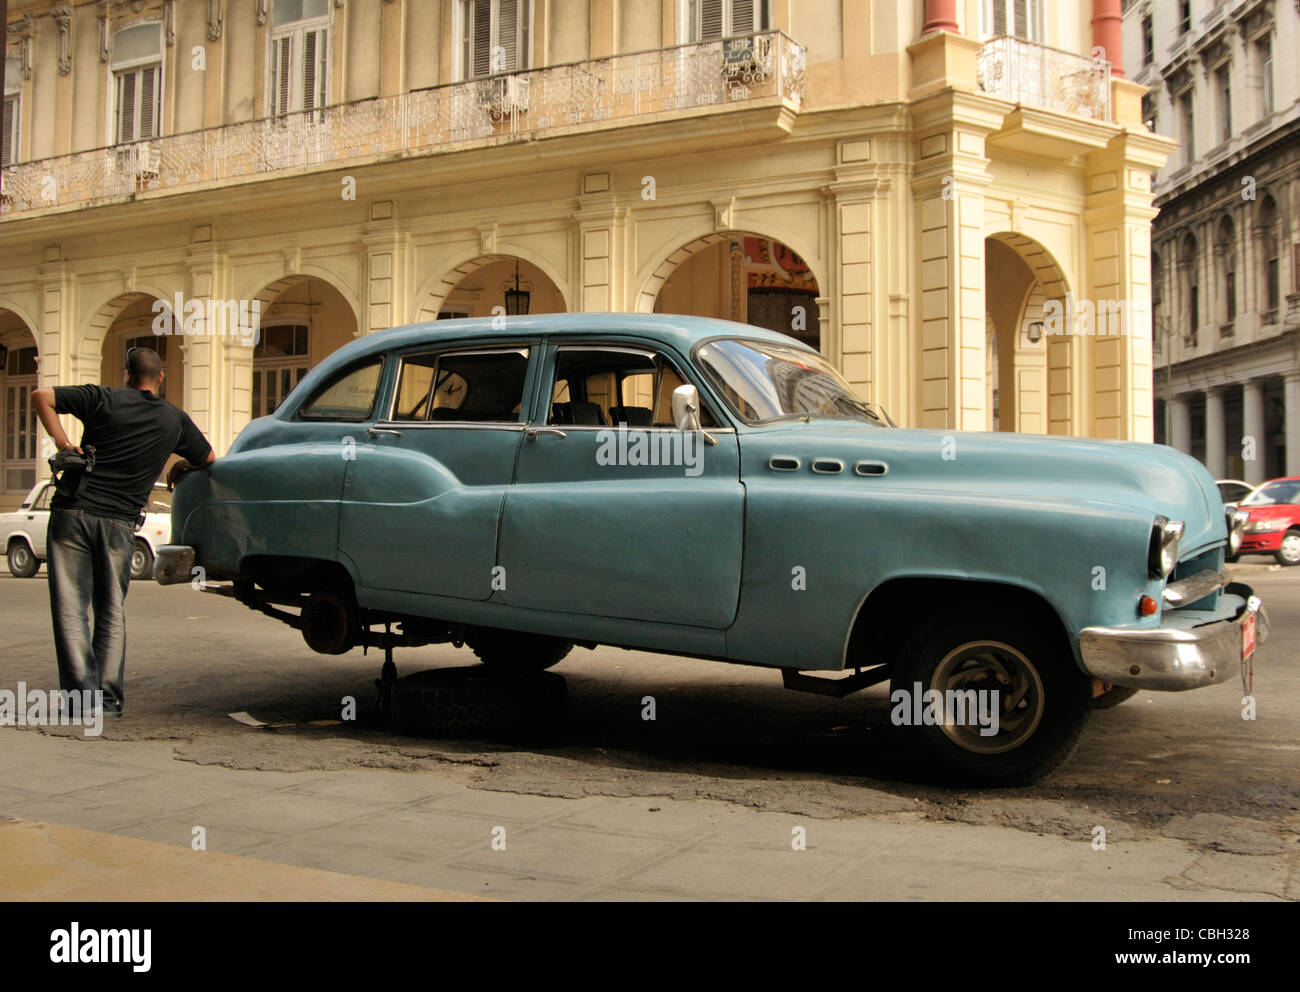 driver facing unexpected with his old '50 car in Havana town, Cuba Stock Photo